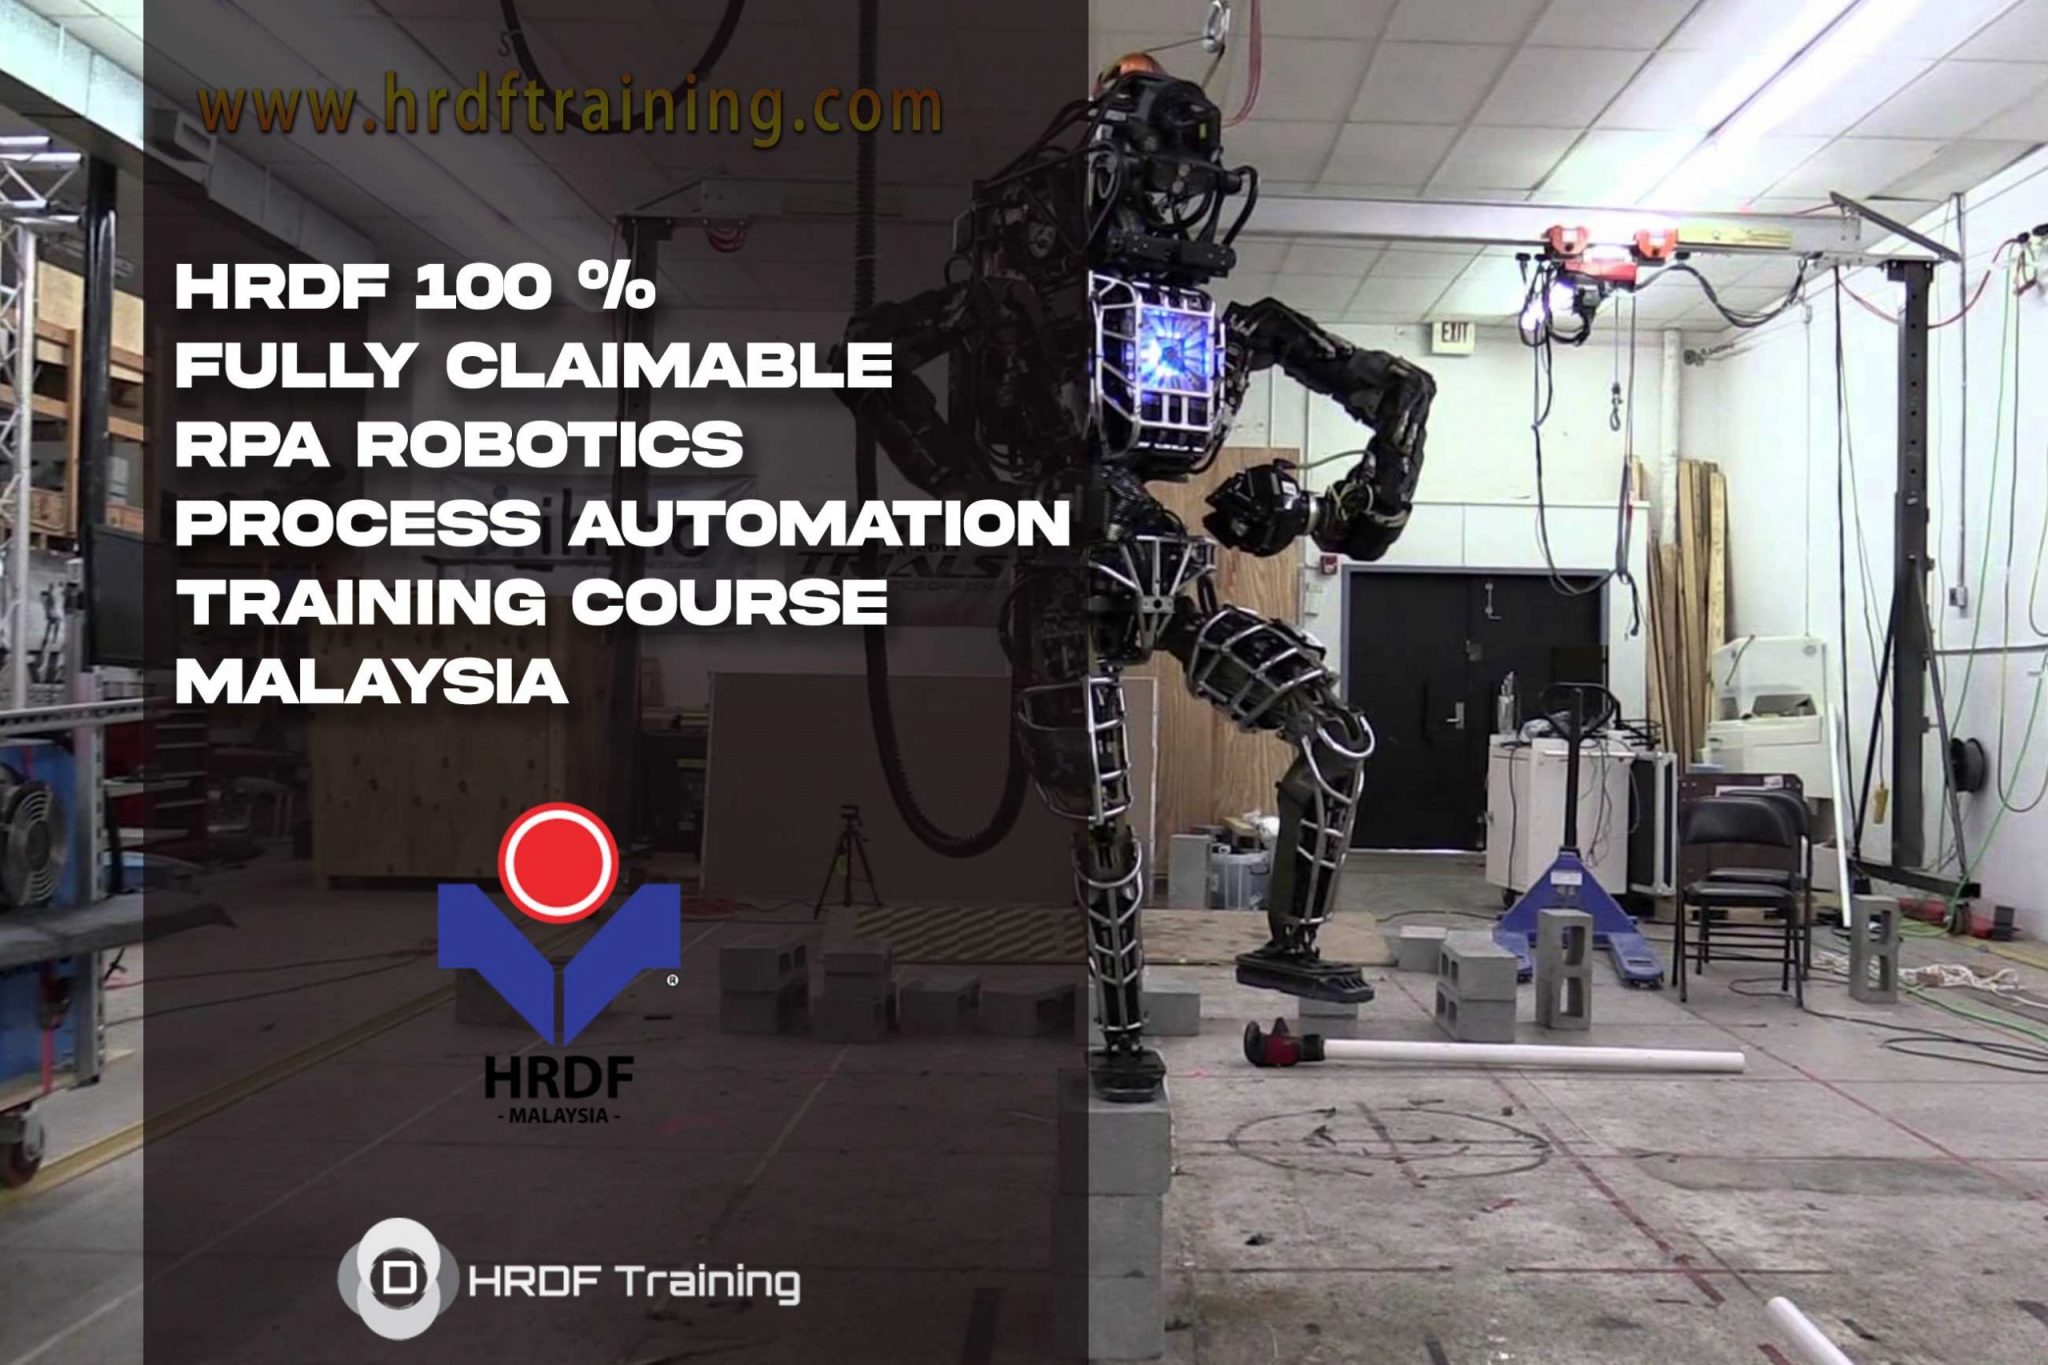 HRDF CLAIMABLE RPA ROBOTICS PROCESS AUTOMATION COURSE TRAINING